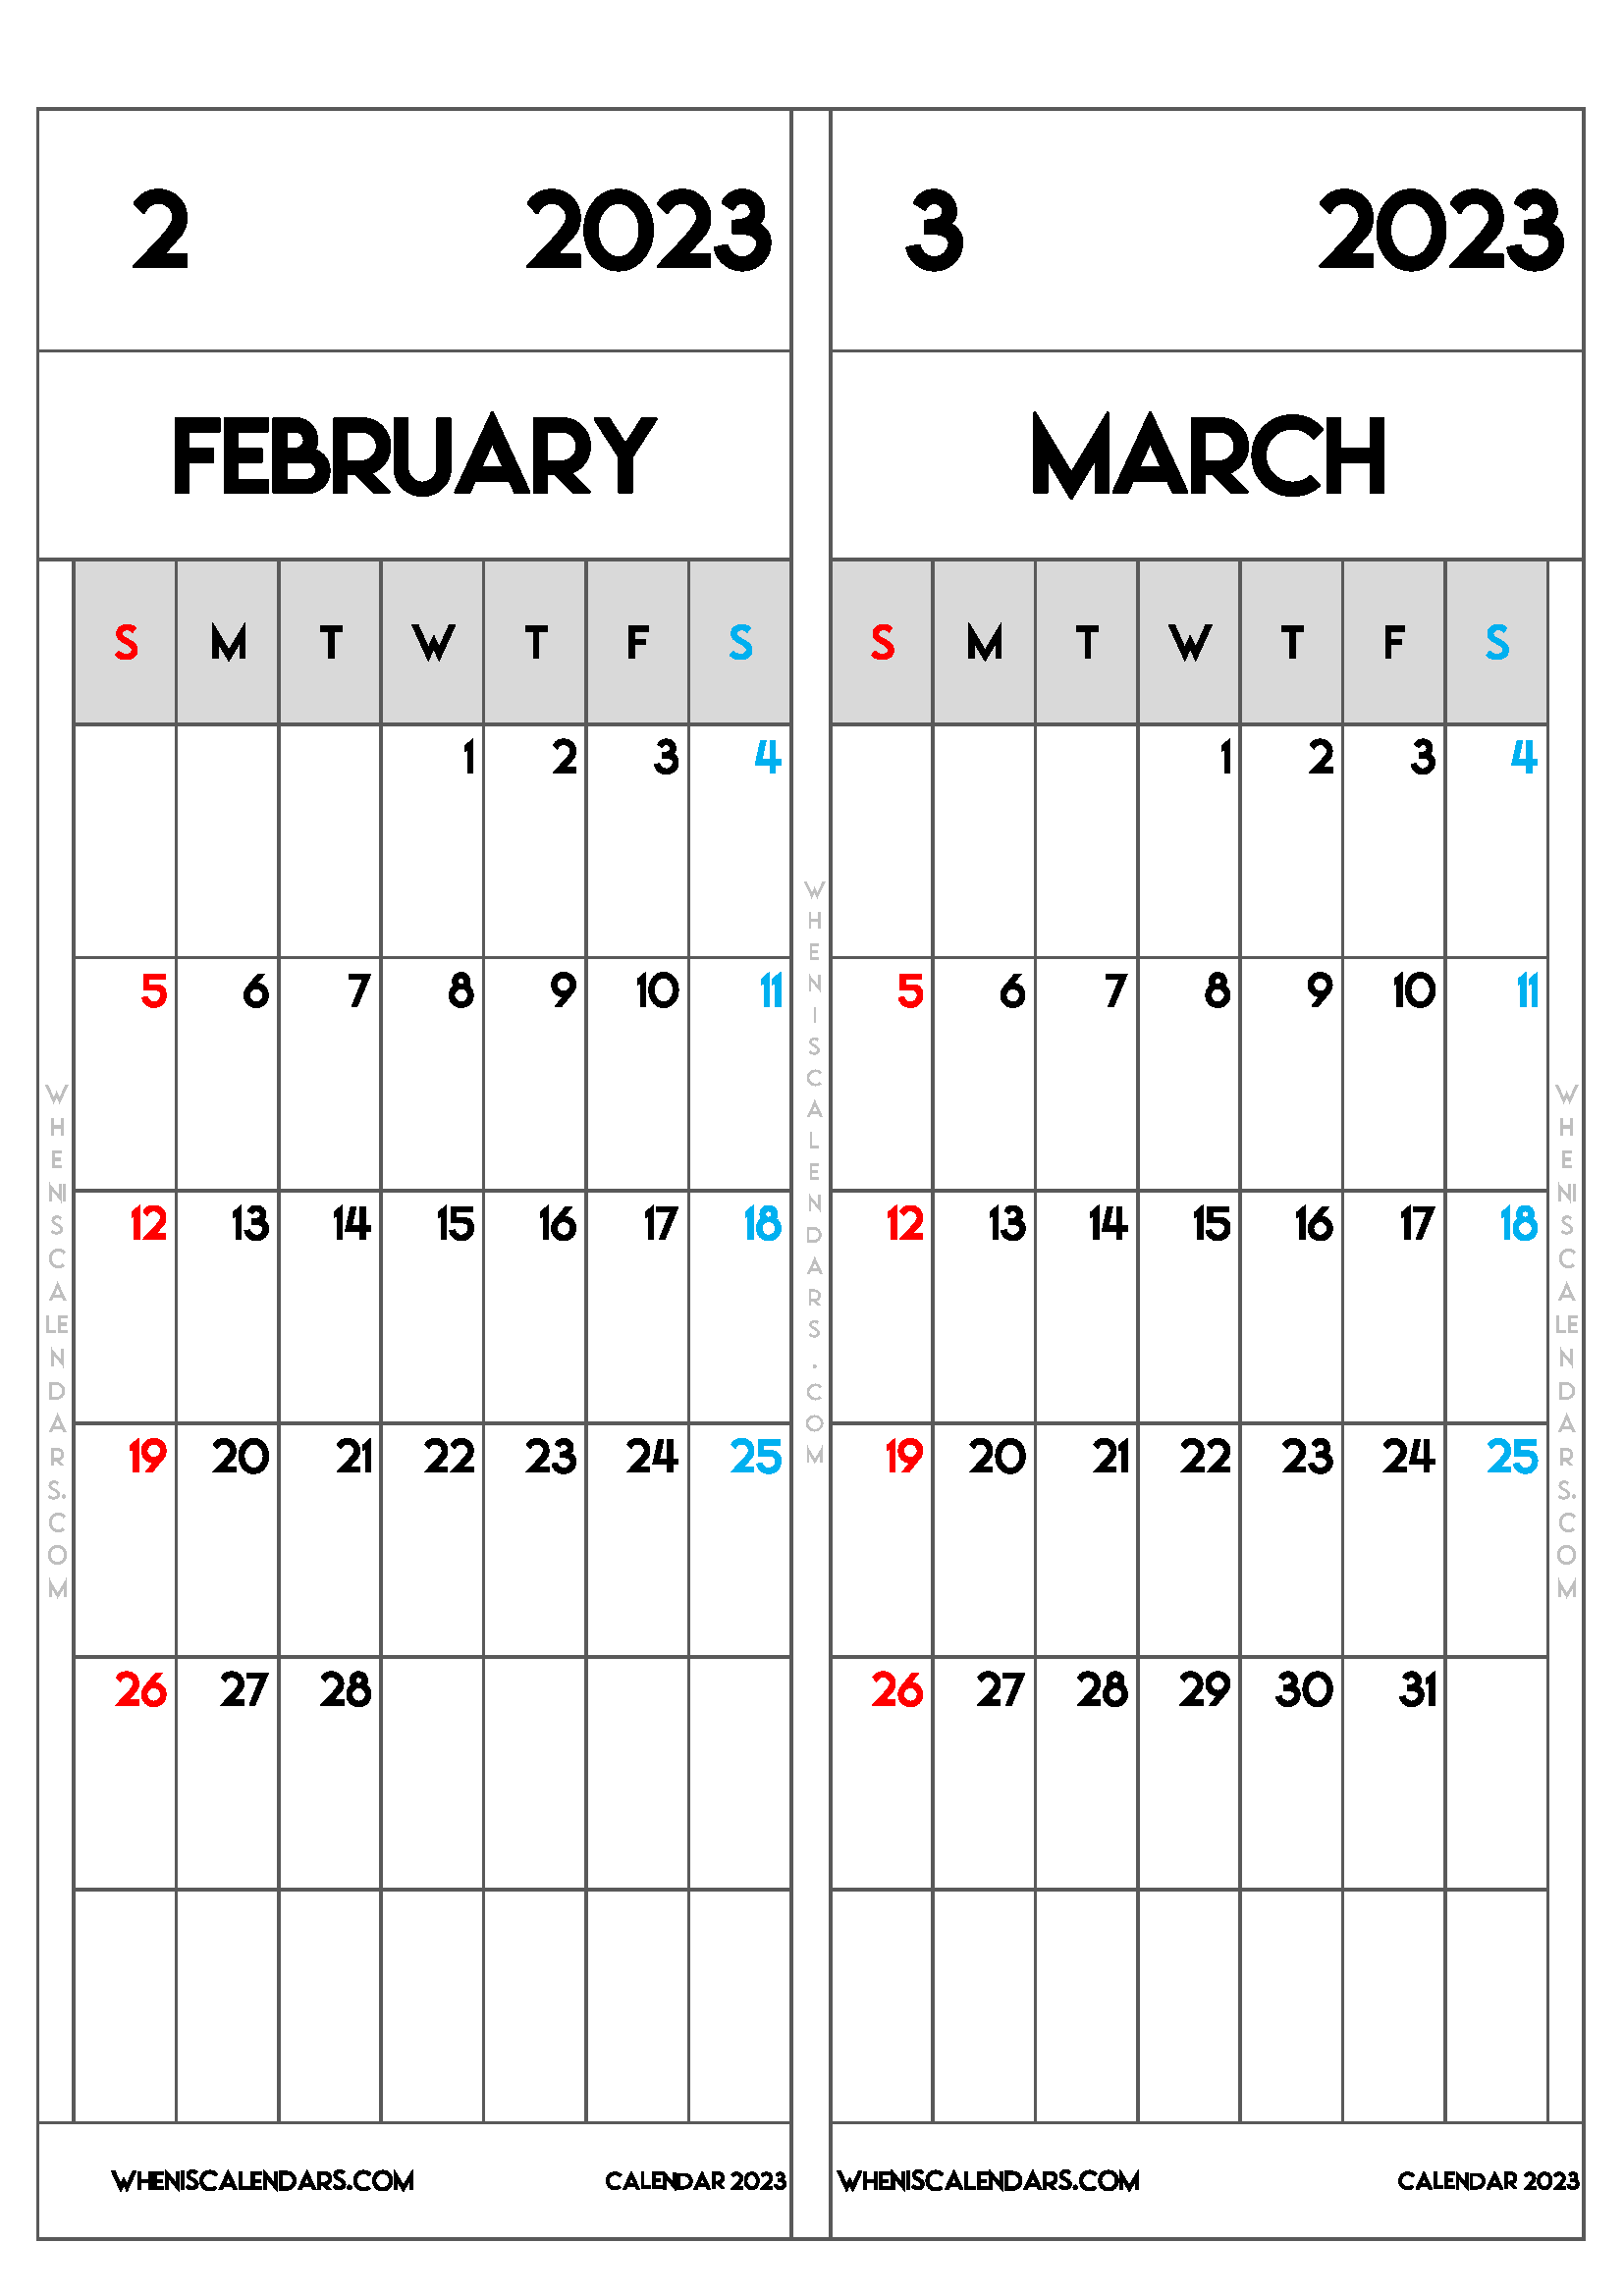 Download Free Printable February March 2023 Calendar Two Month per Page as PDF and PNG